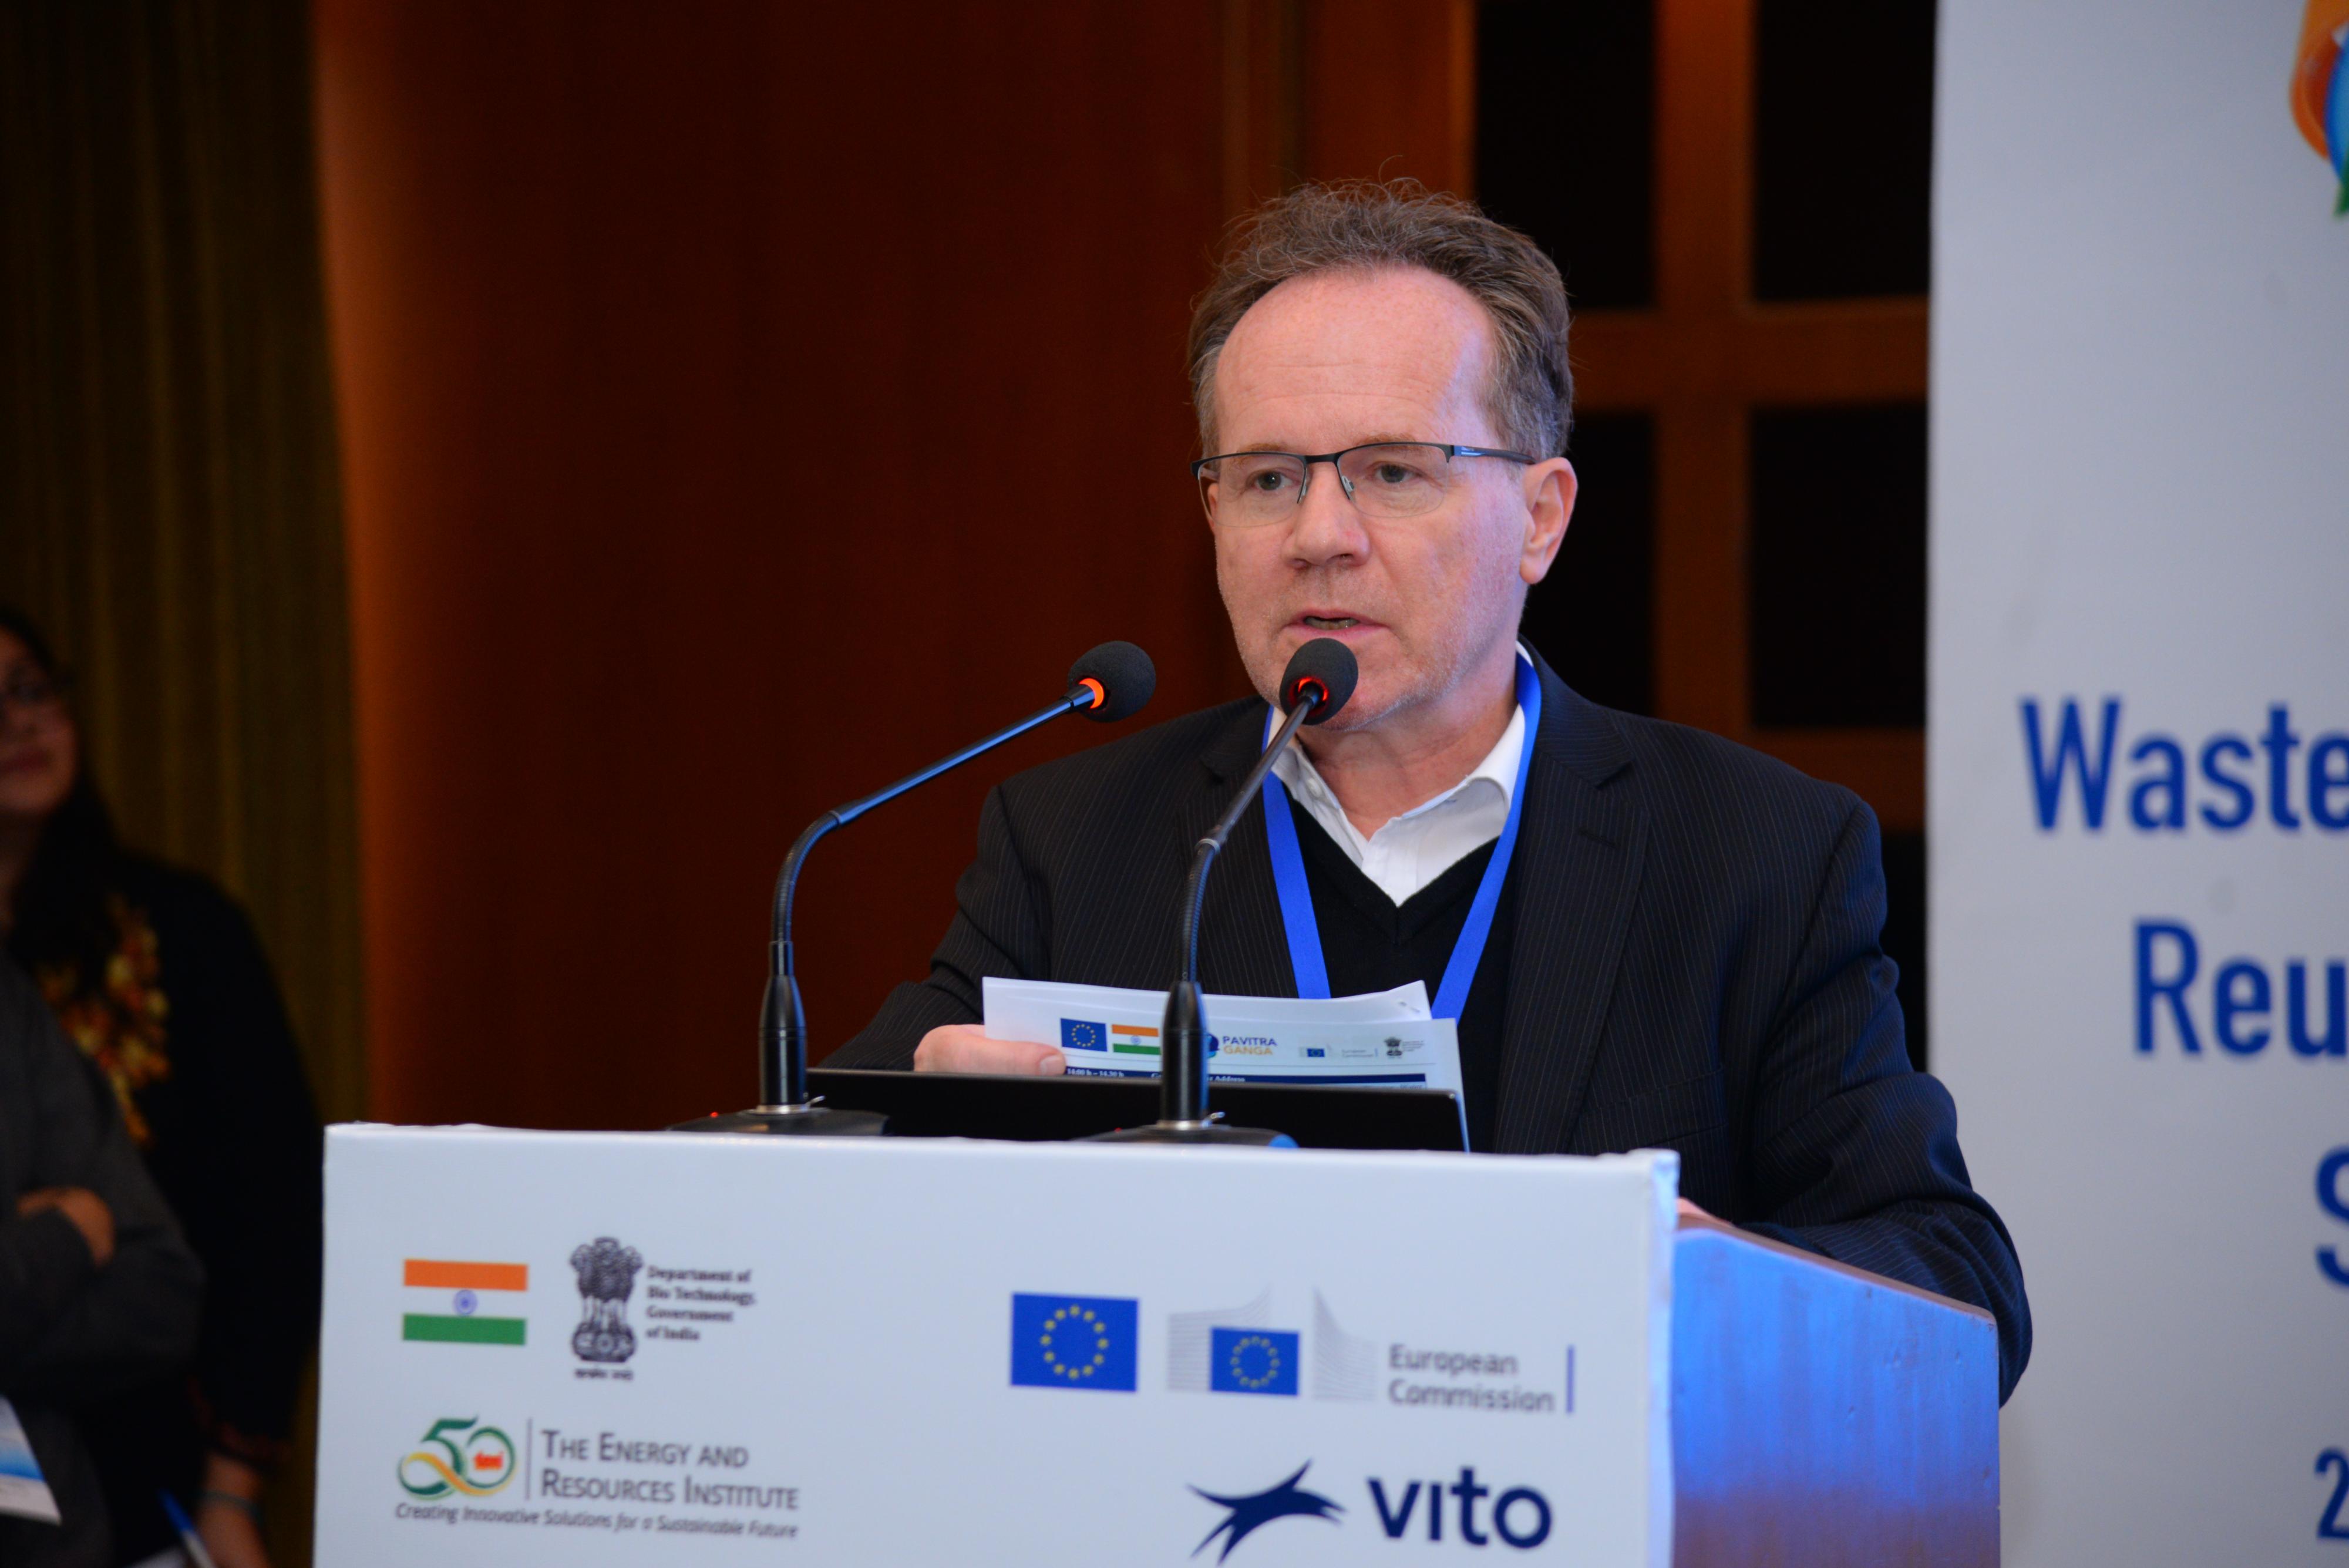 Mr Pierrick Fillon-Ashida, First Counsellor - Head of Research & Innovation Section, Delegation of the European Union to India